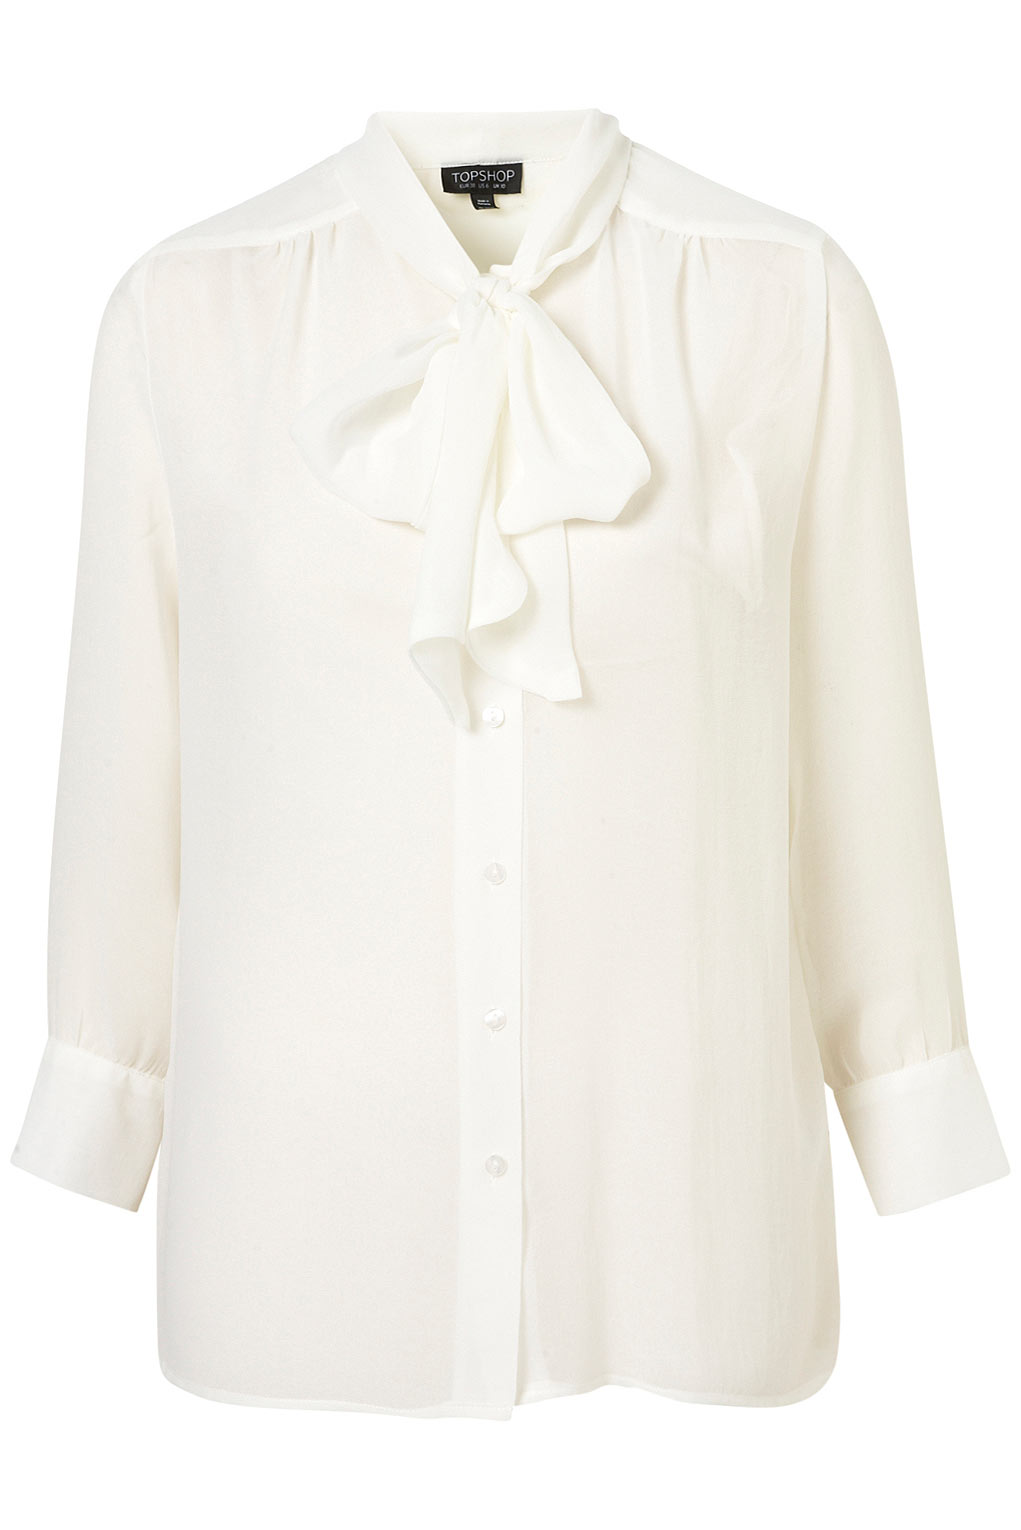 TOPSHOP High Neck Pussybow Blouse in Cream (White) - Lyst